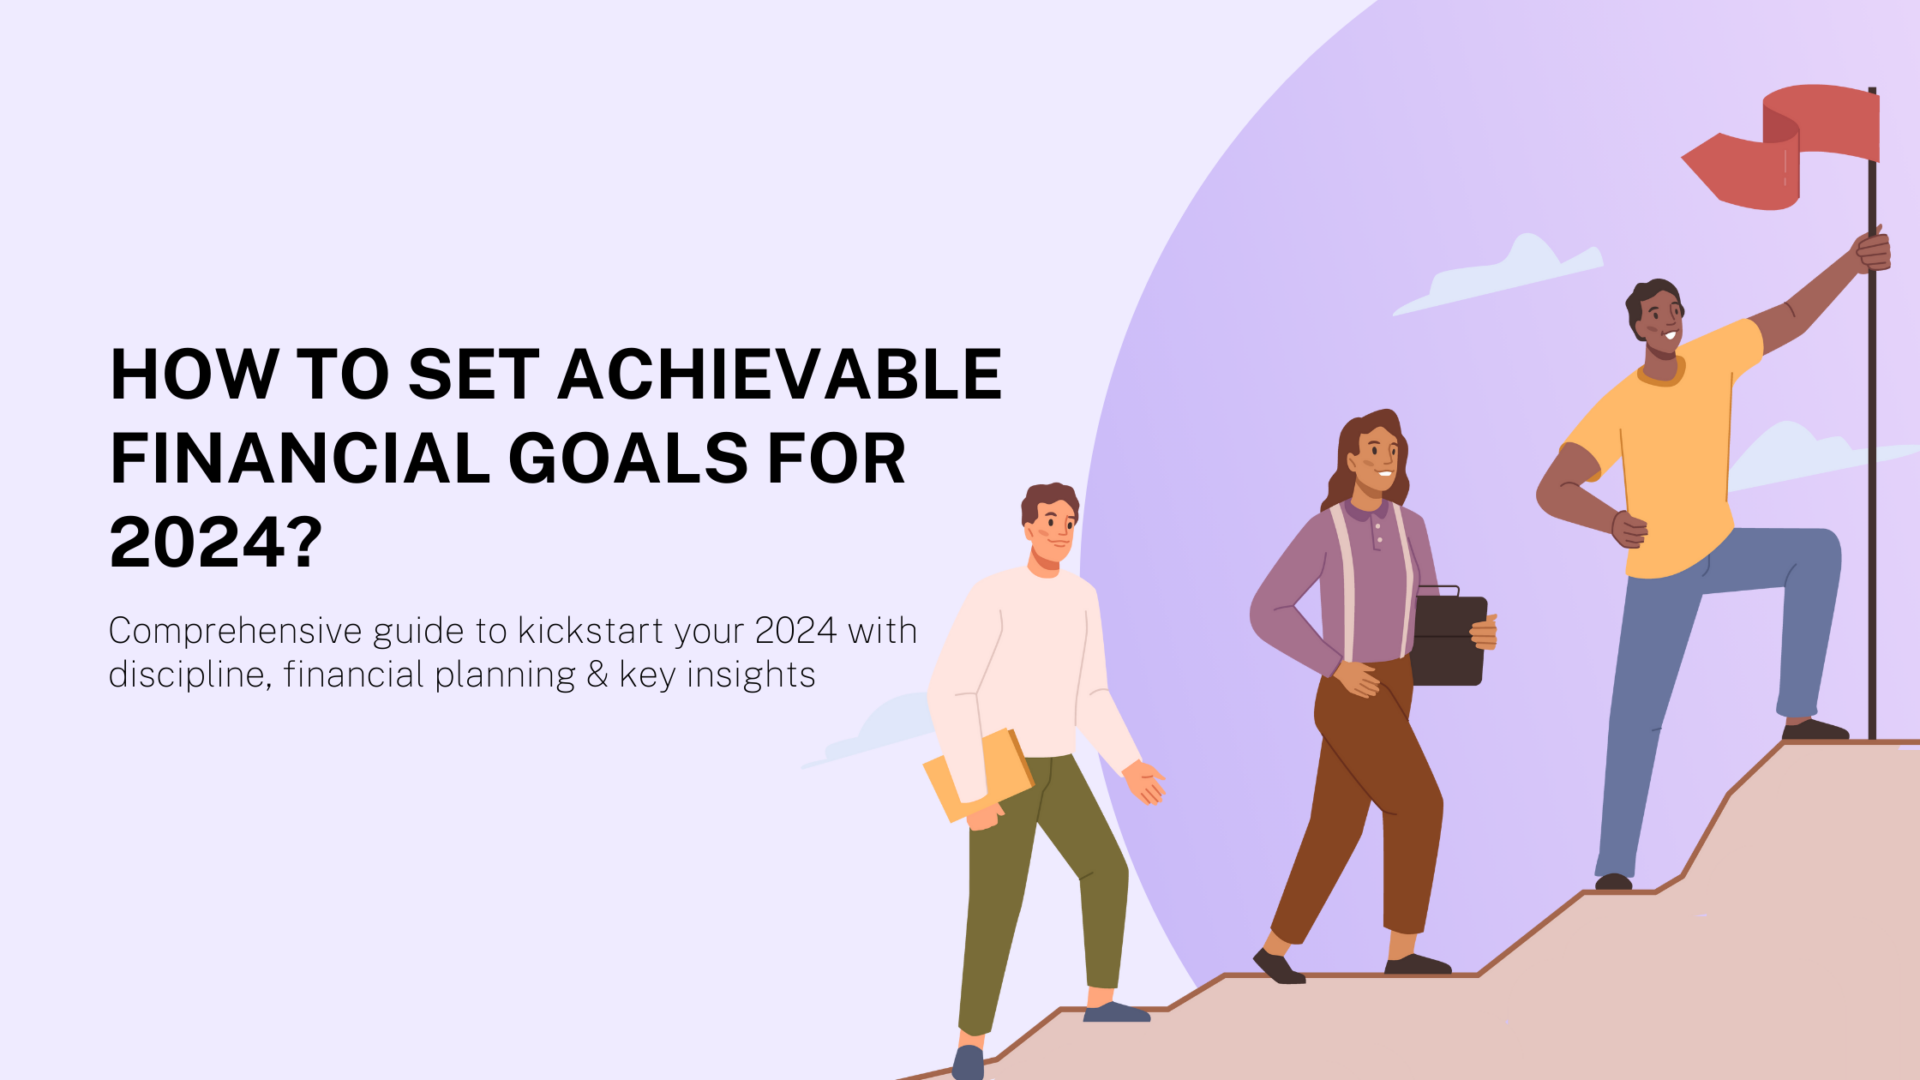 How to Set Achievable Financial Goals for 2024